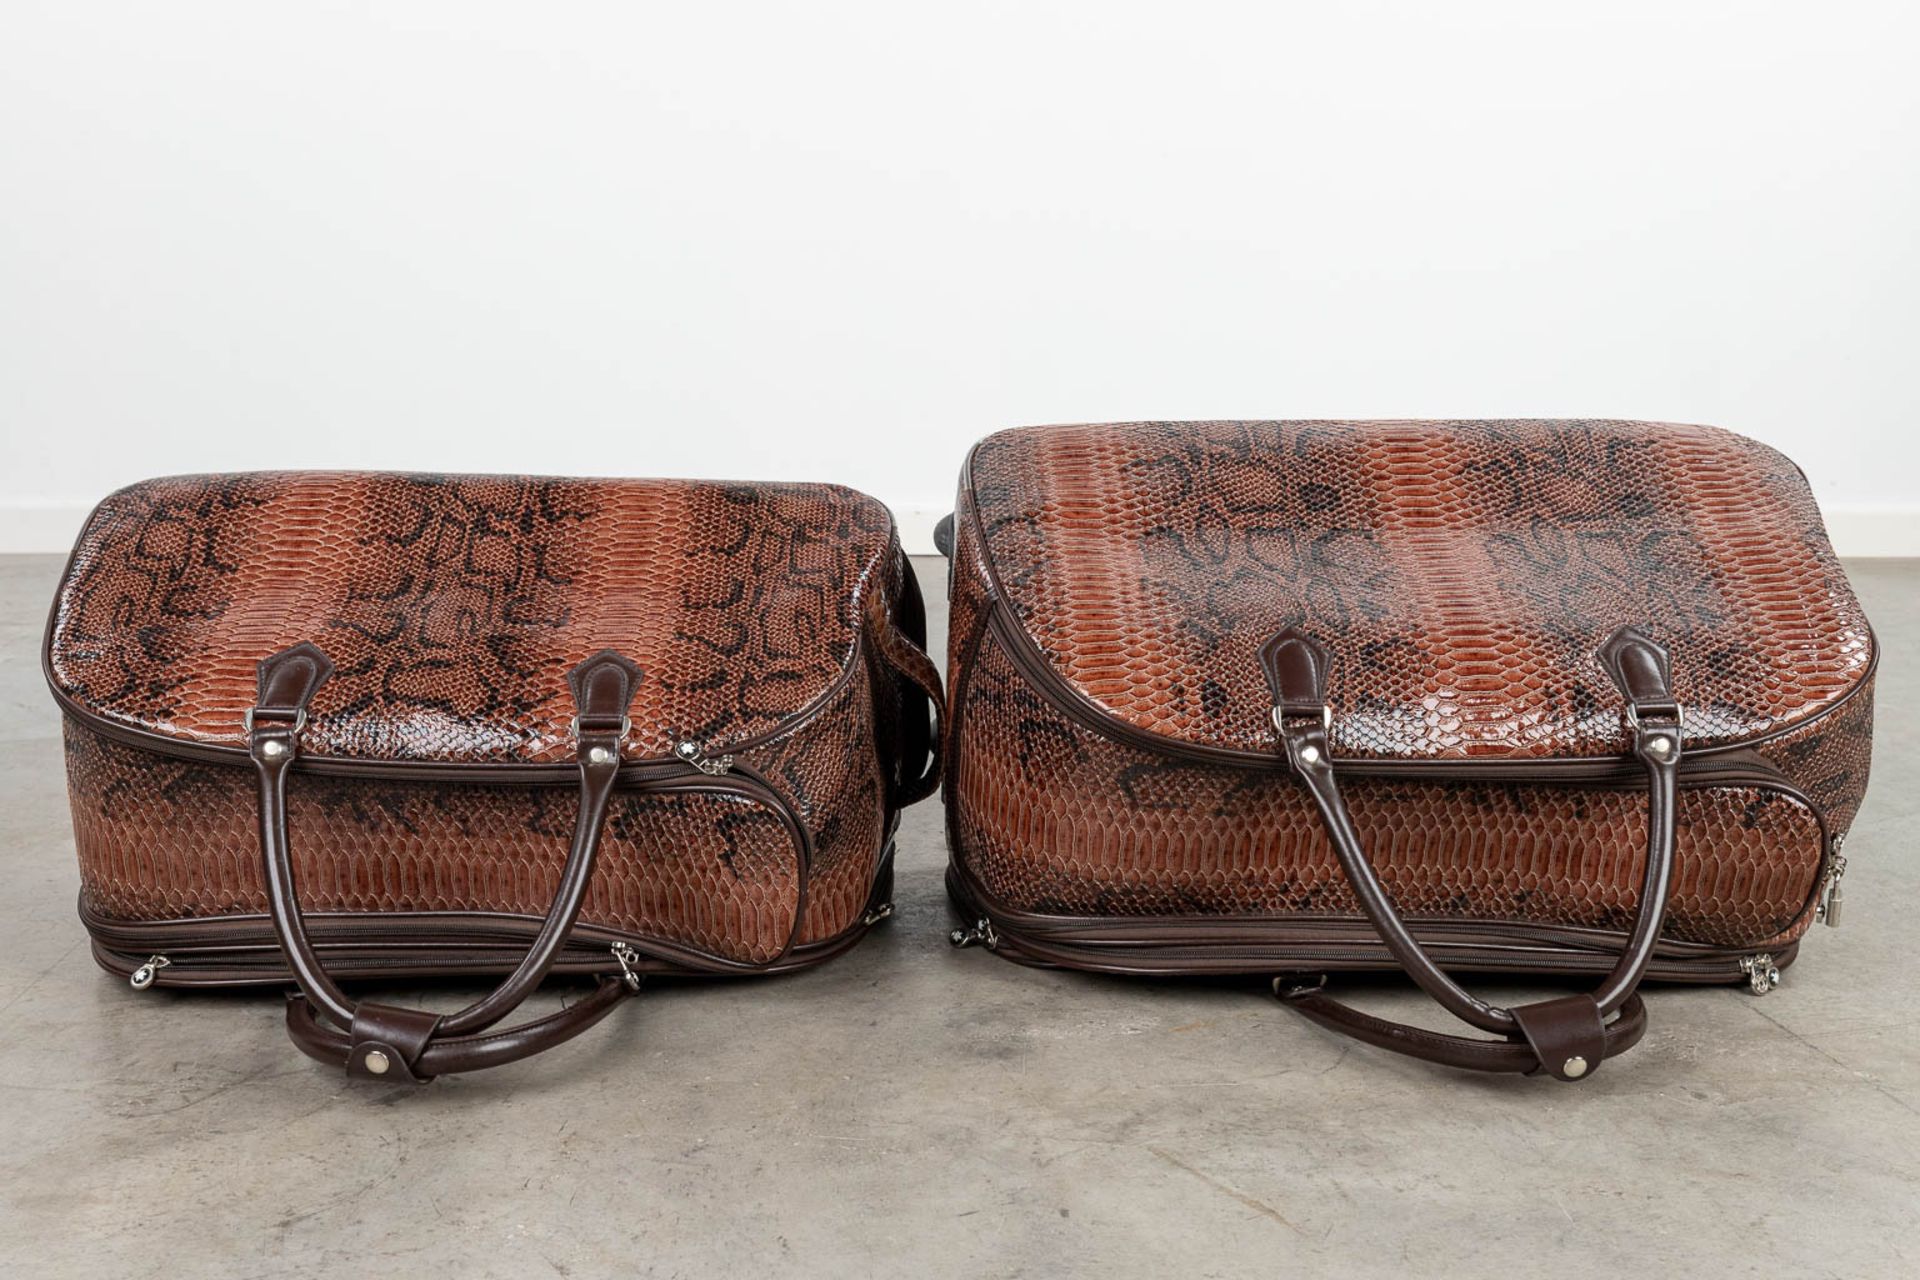 A set of 2 travel bags made of leather by Montblanc. (H:34cm) - Image 12 of 19